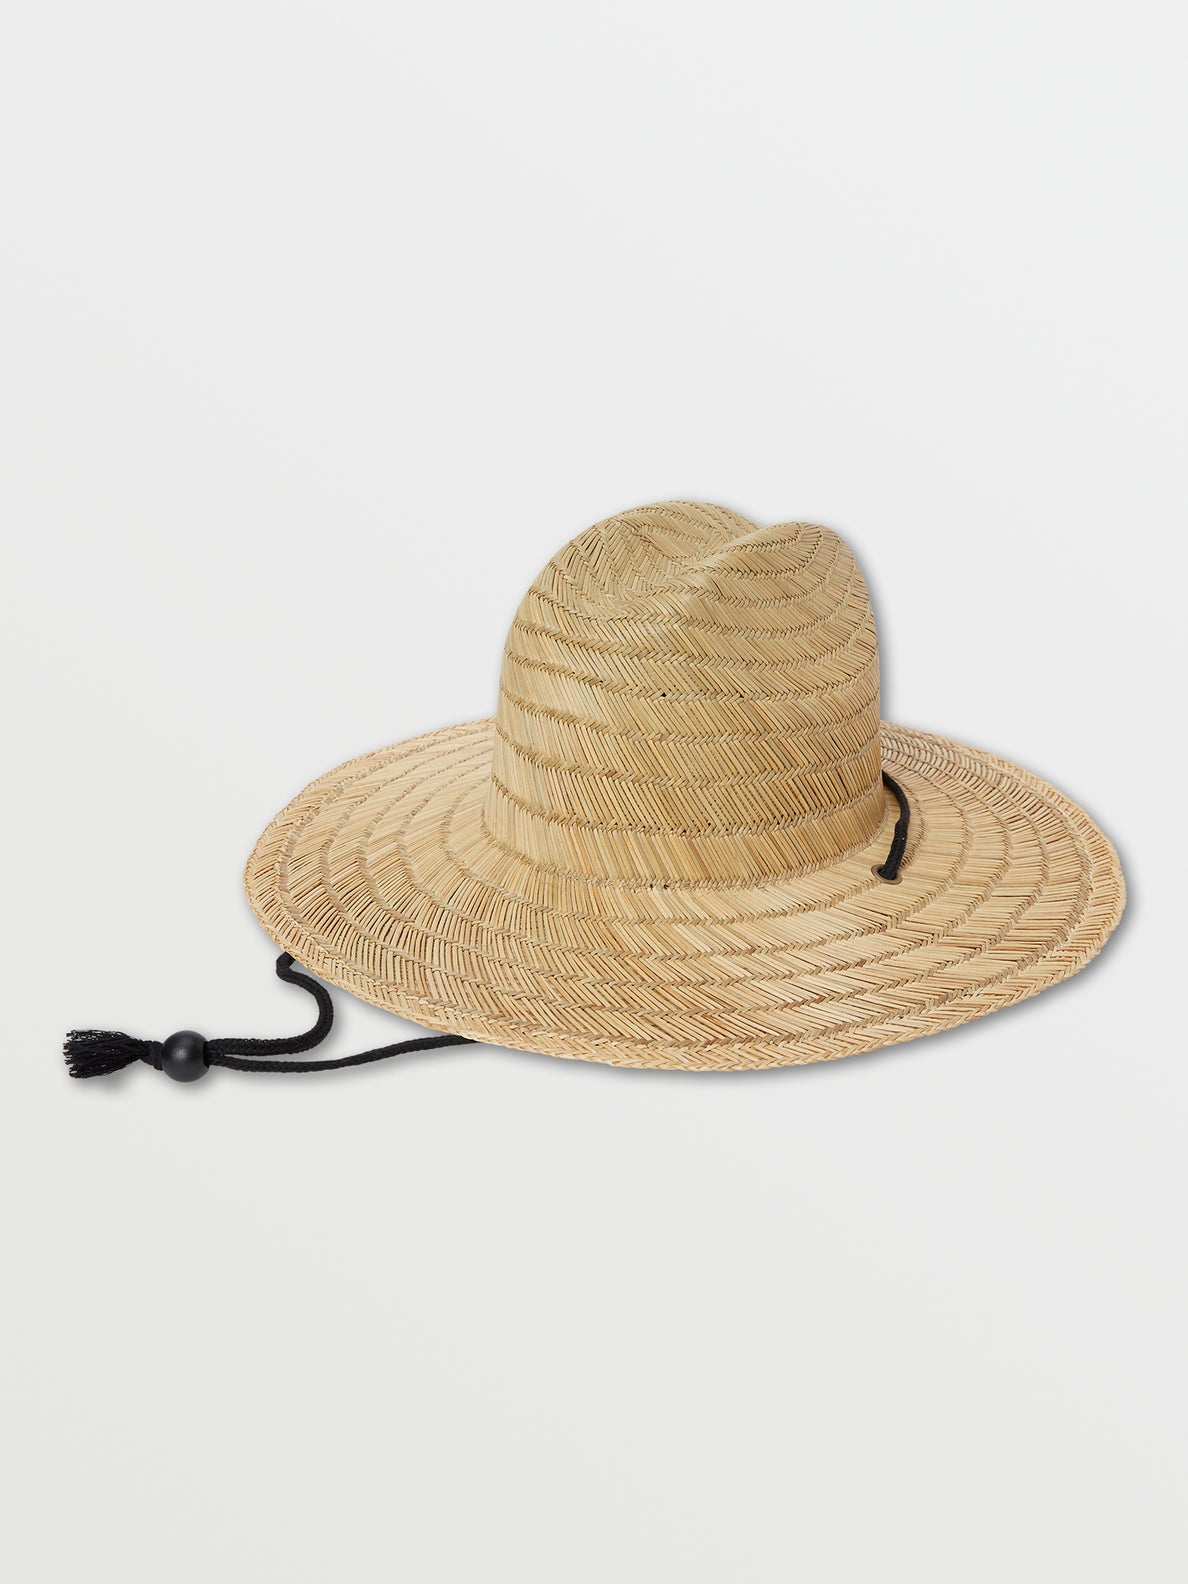 OBX POGUE LIFE WIDE BRIM STRAW HAT in NATURAL